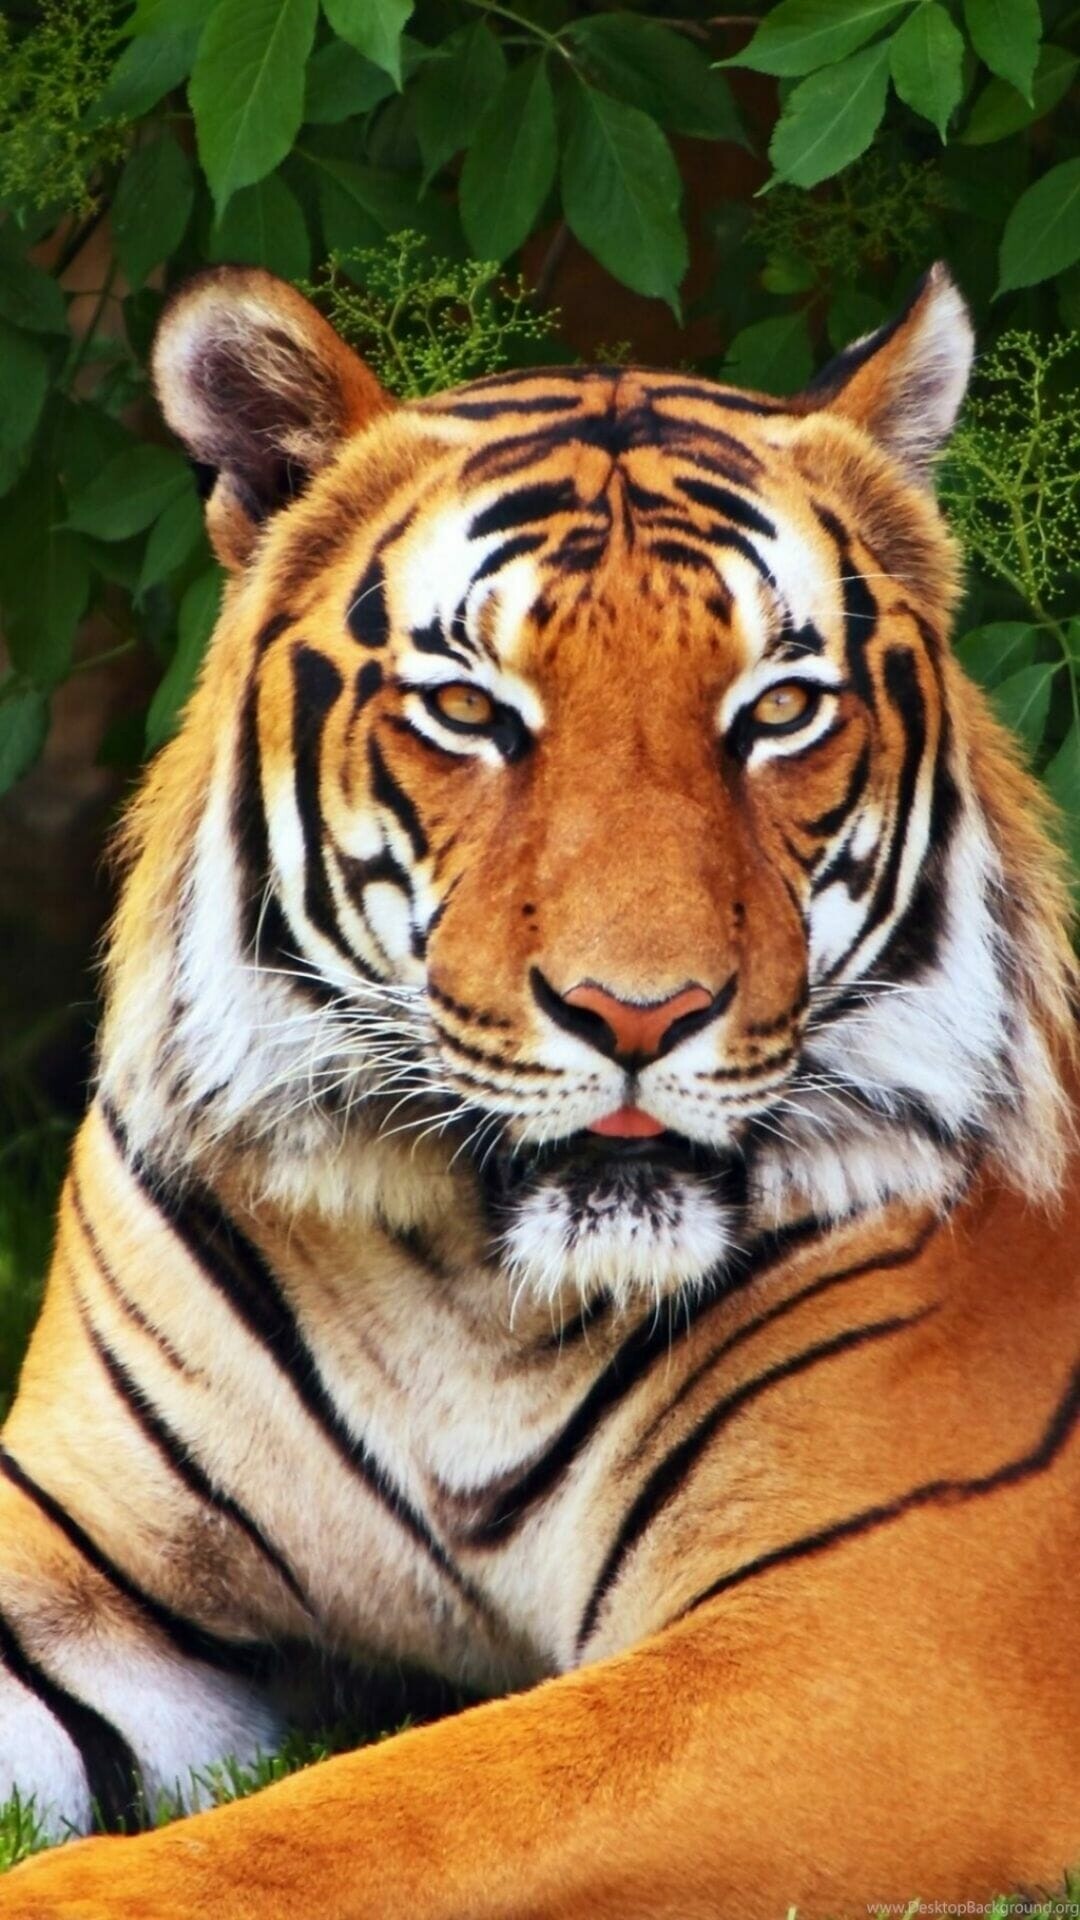 Tiger: The largest cat family known for its strength, power, and agility. 1080x1920 Full HD Background.